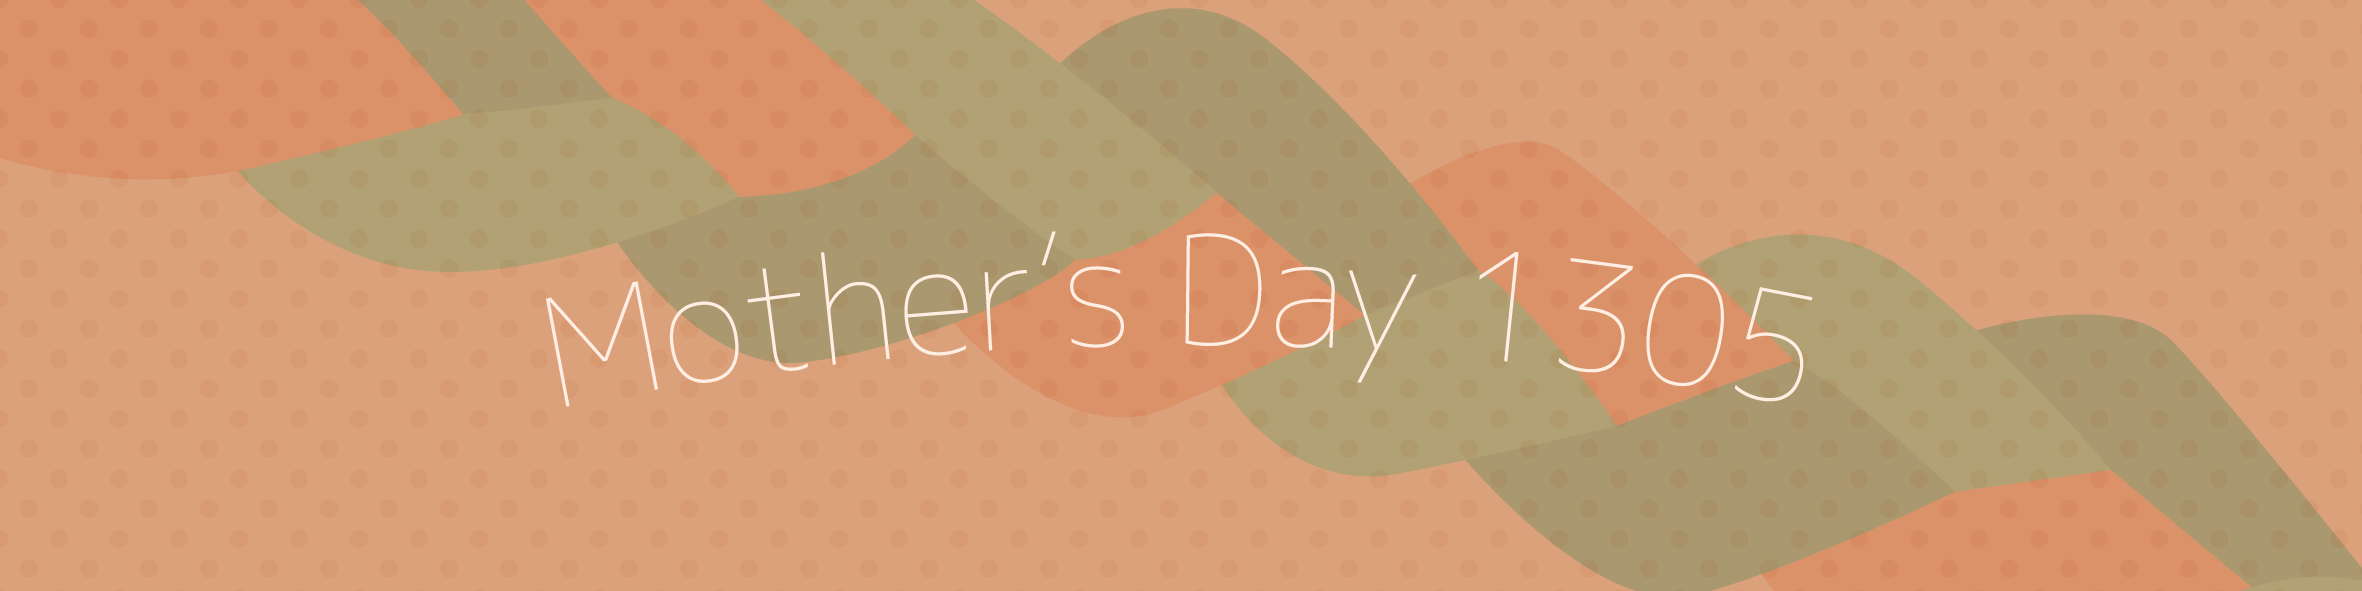 MOTHER'S DAY 2018 TITLE